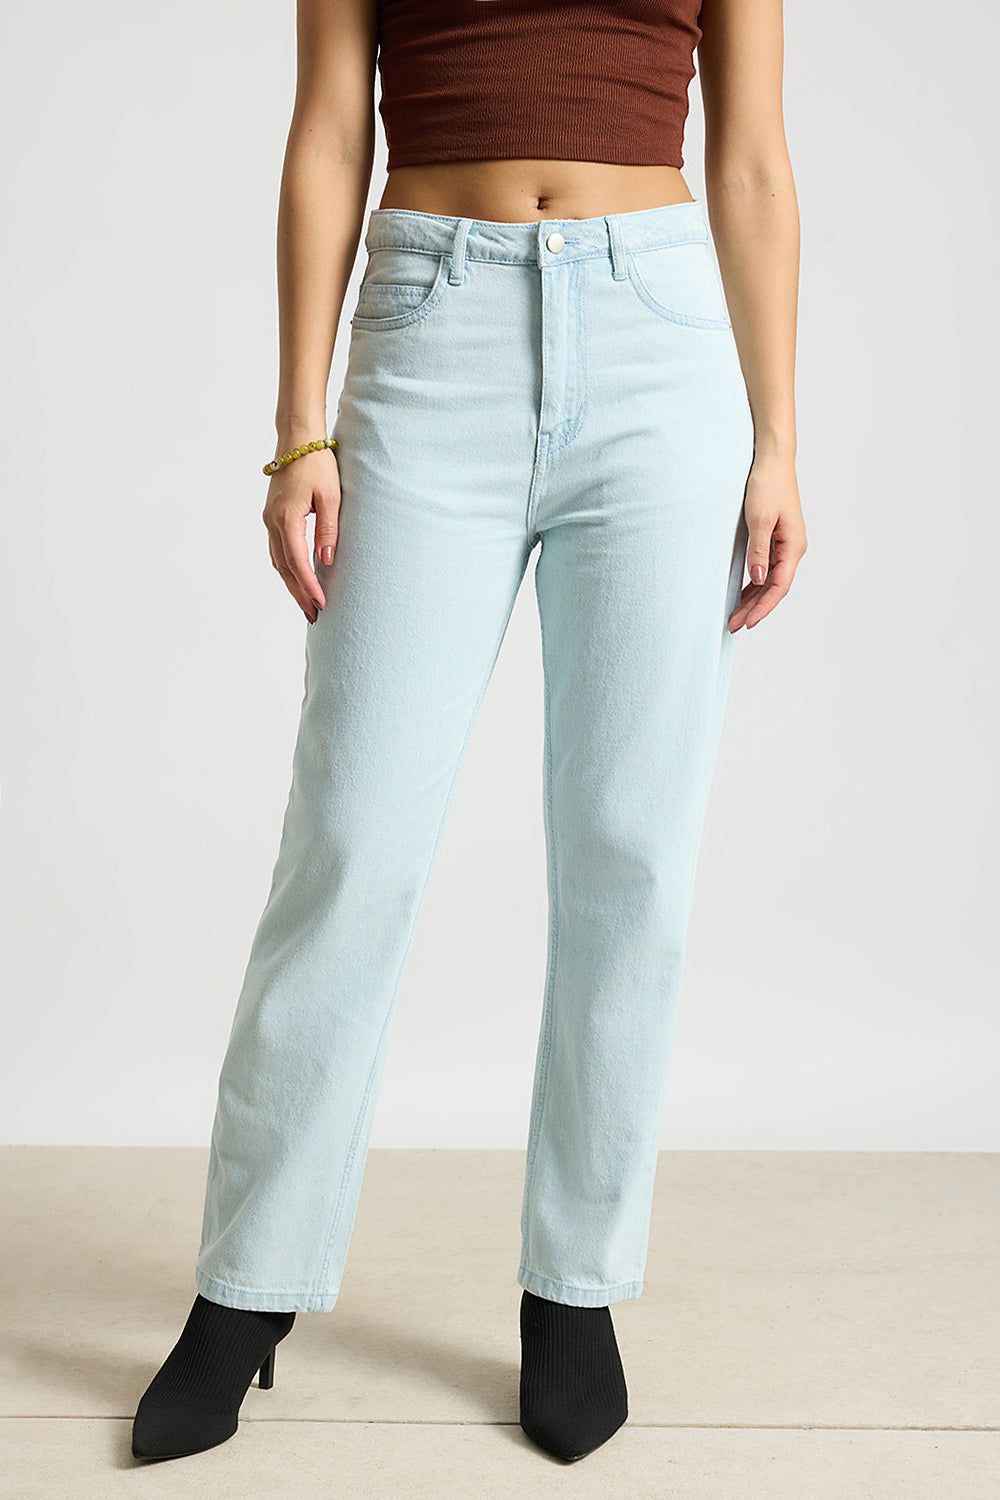 HEAVENLY HIGH WAIST MOM FIT JEANS